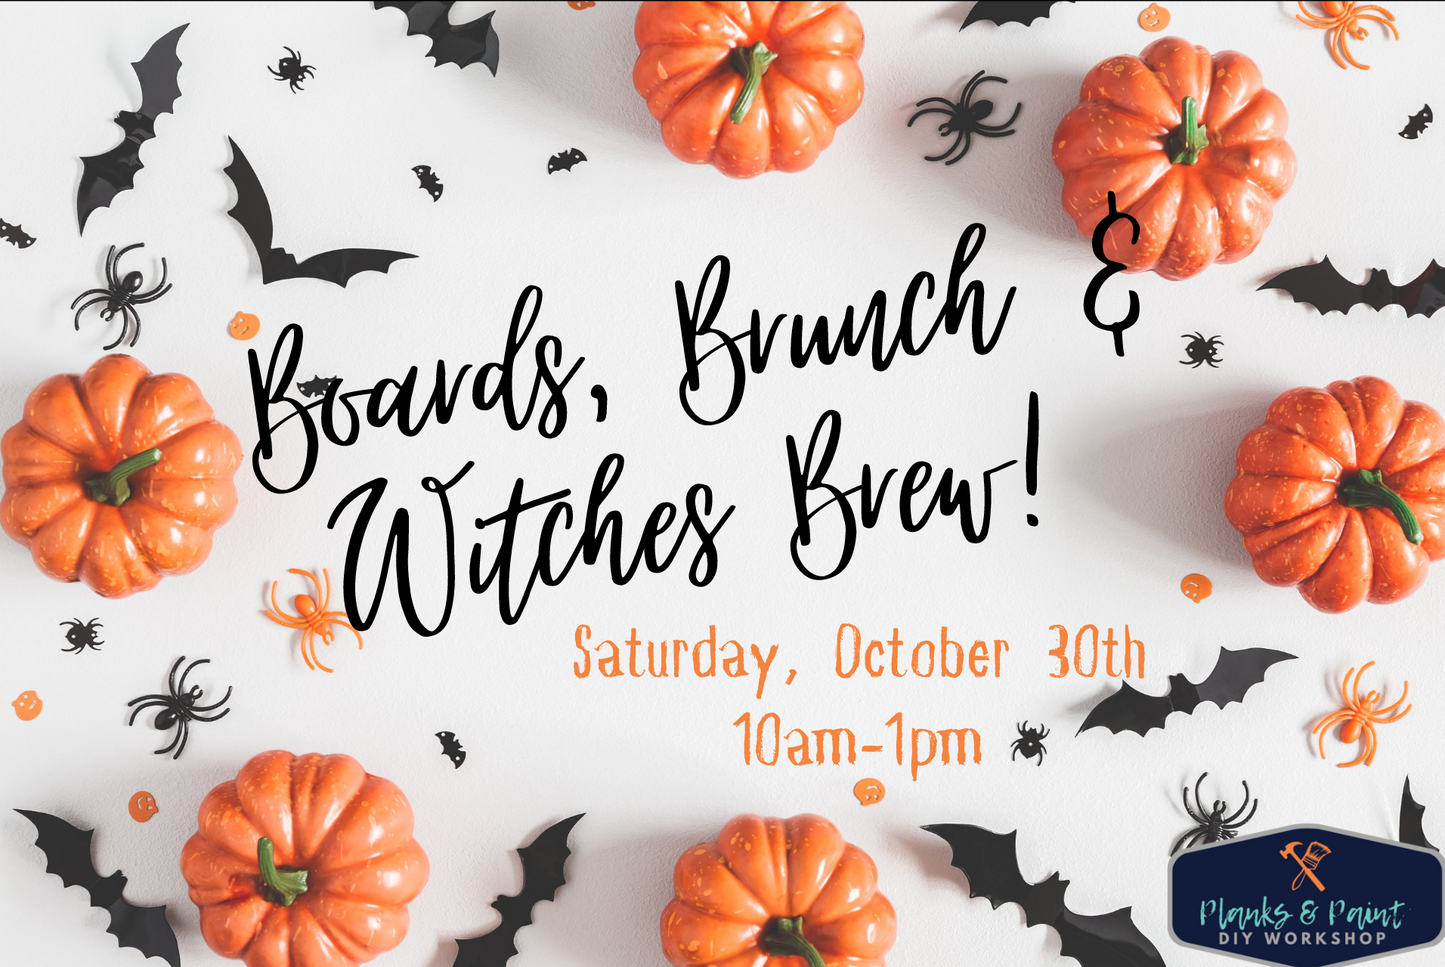 Boards, Brunch & Witches Brew!